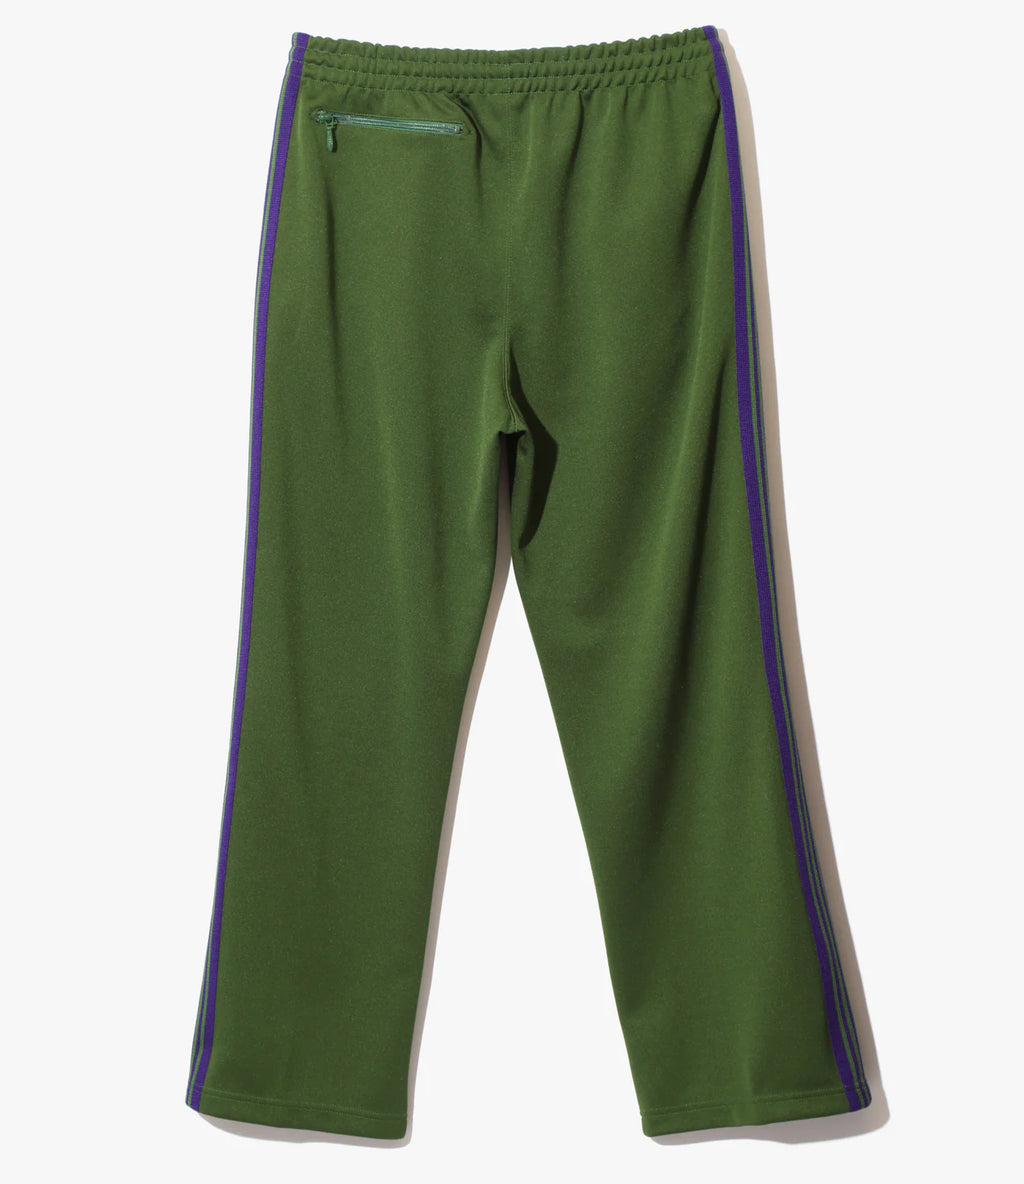 Needles FW23 NARROW TRACK PANT - POLY SMOOTH / IVY GRN -NUBIAN